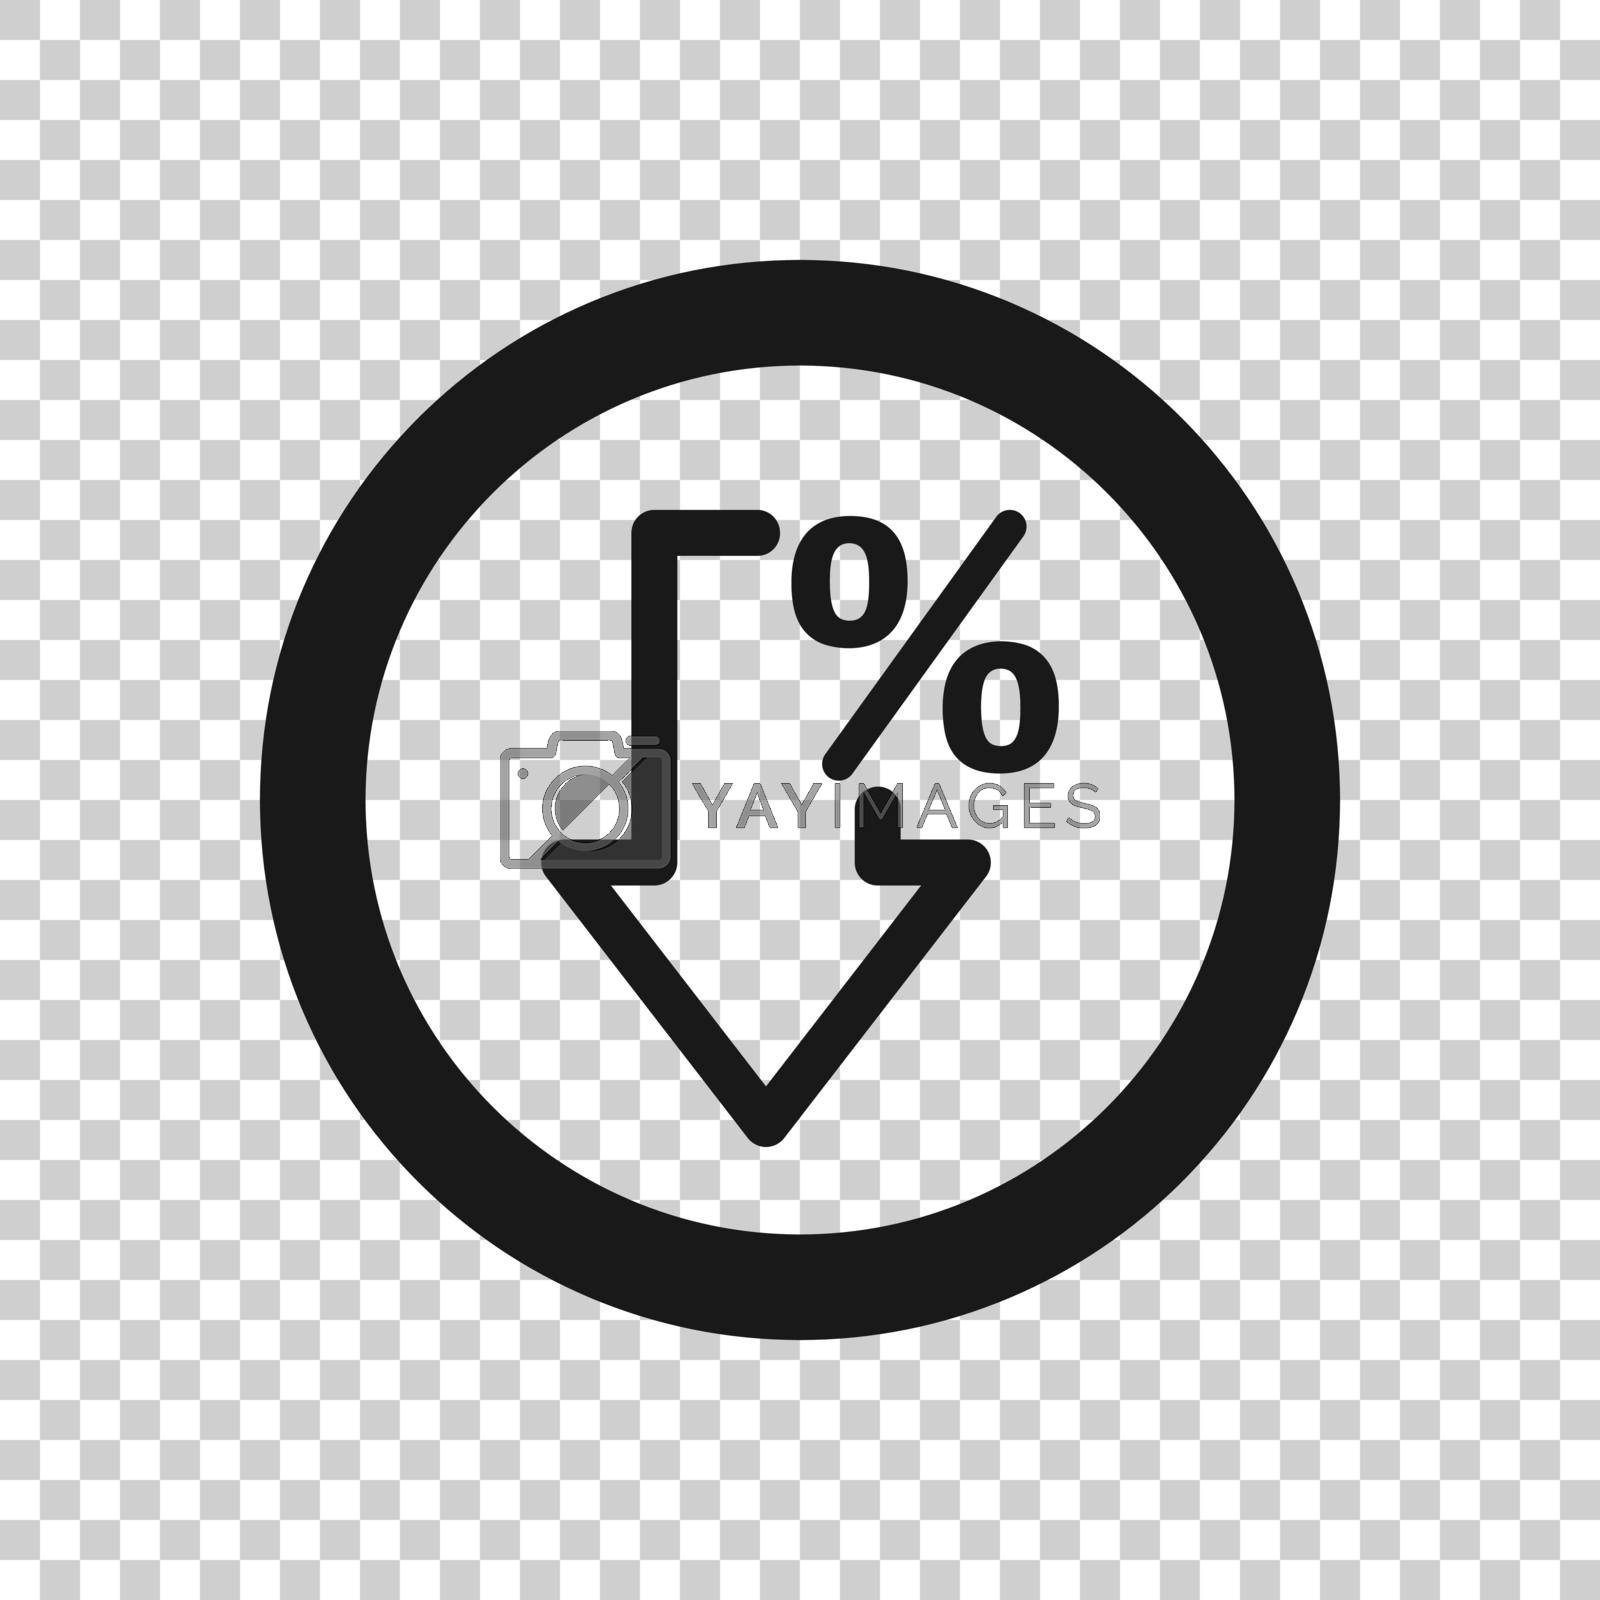 Royalty free image of Decline arrow icon in flat style. Decrease vector illustration on white isolated background. Revenue model business concept. by LysenkoA